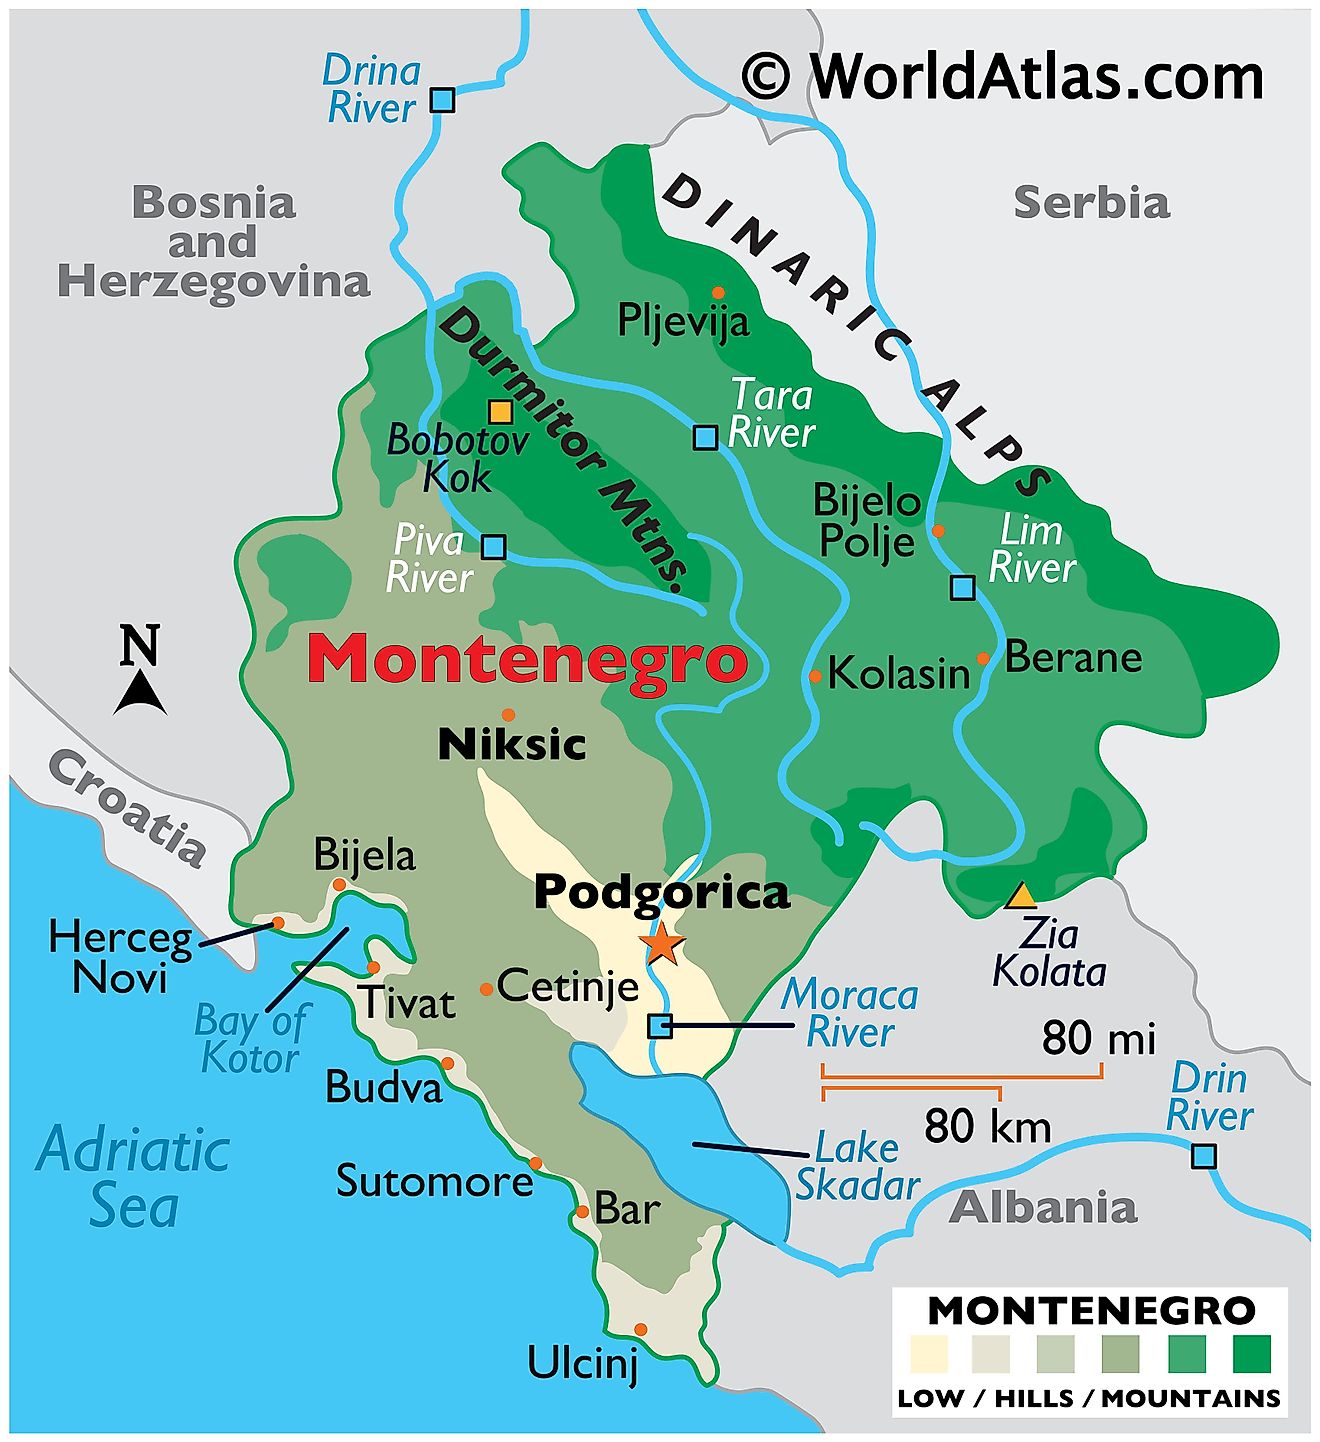 Physical Map of Montenegro showing relief, major mountain ranges, rivers, Lake Skadar, important cities, bordering countries, etc.